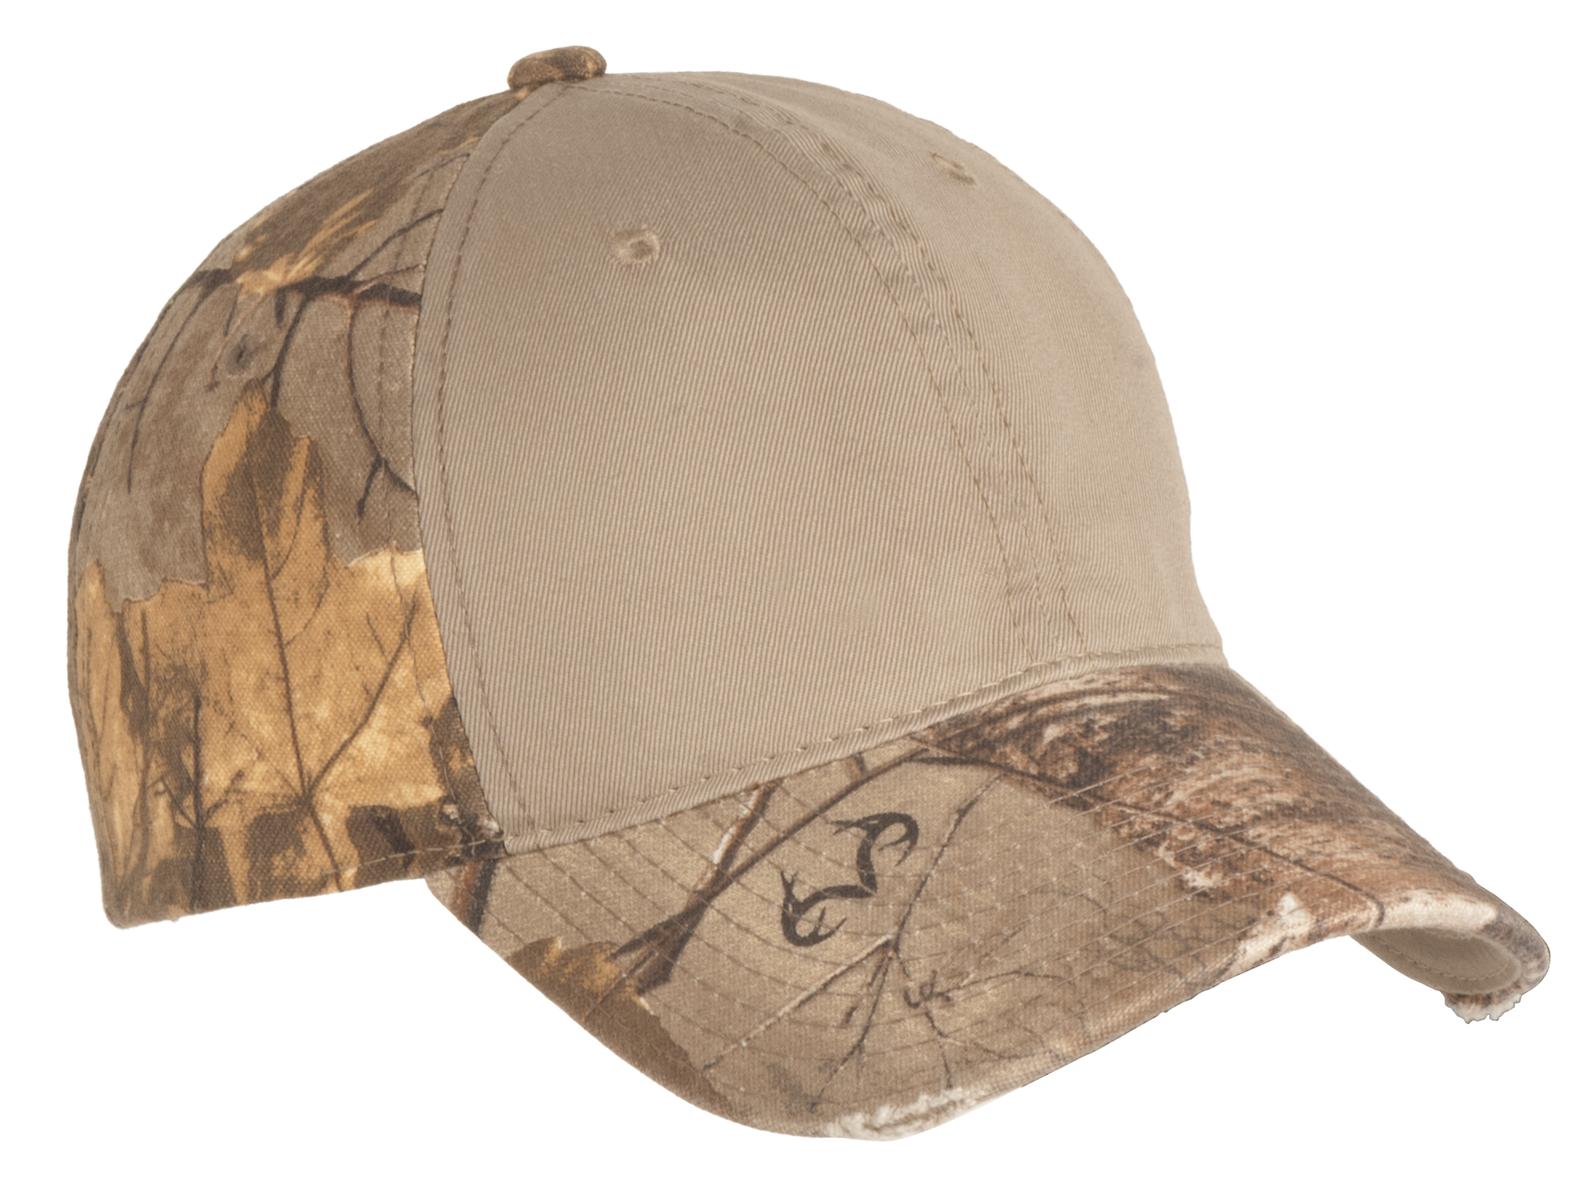 Port Authority Camo Cap with Contrast Front Panel. C807